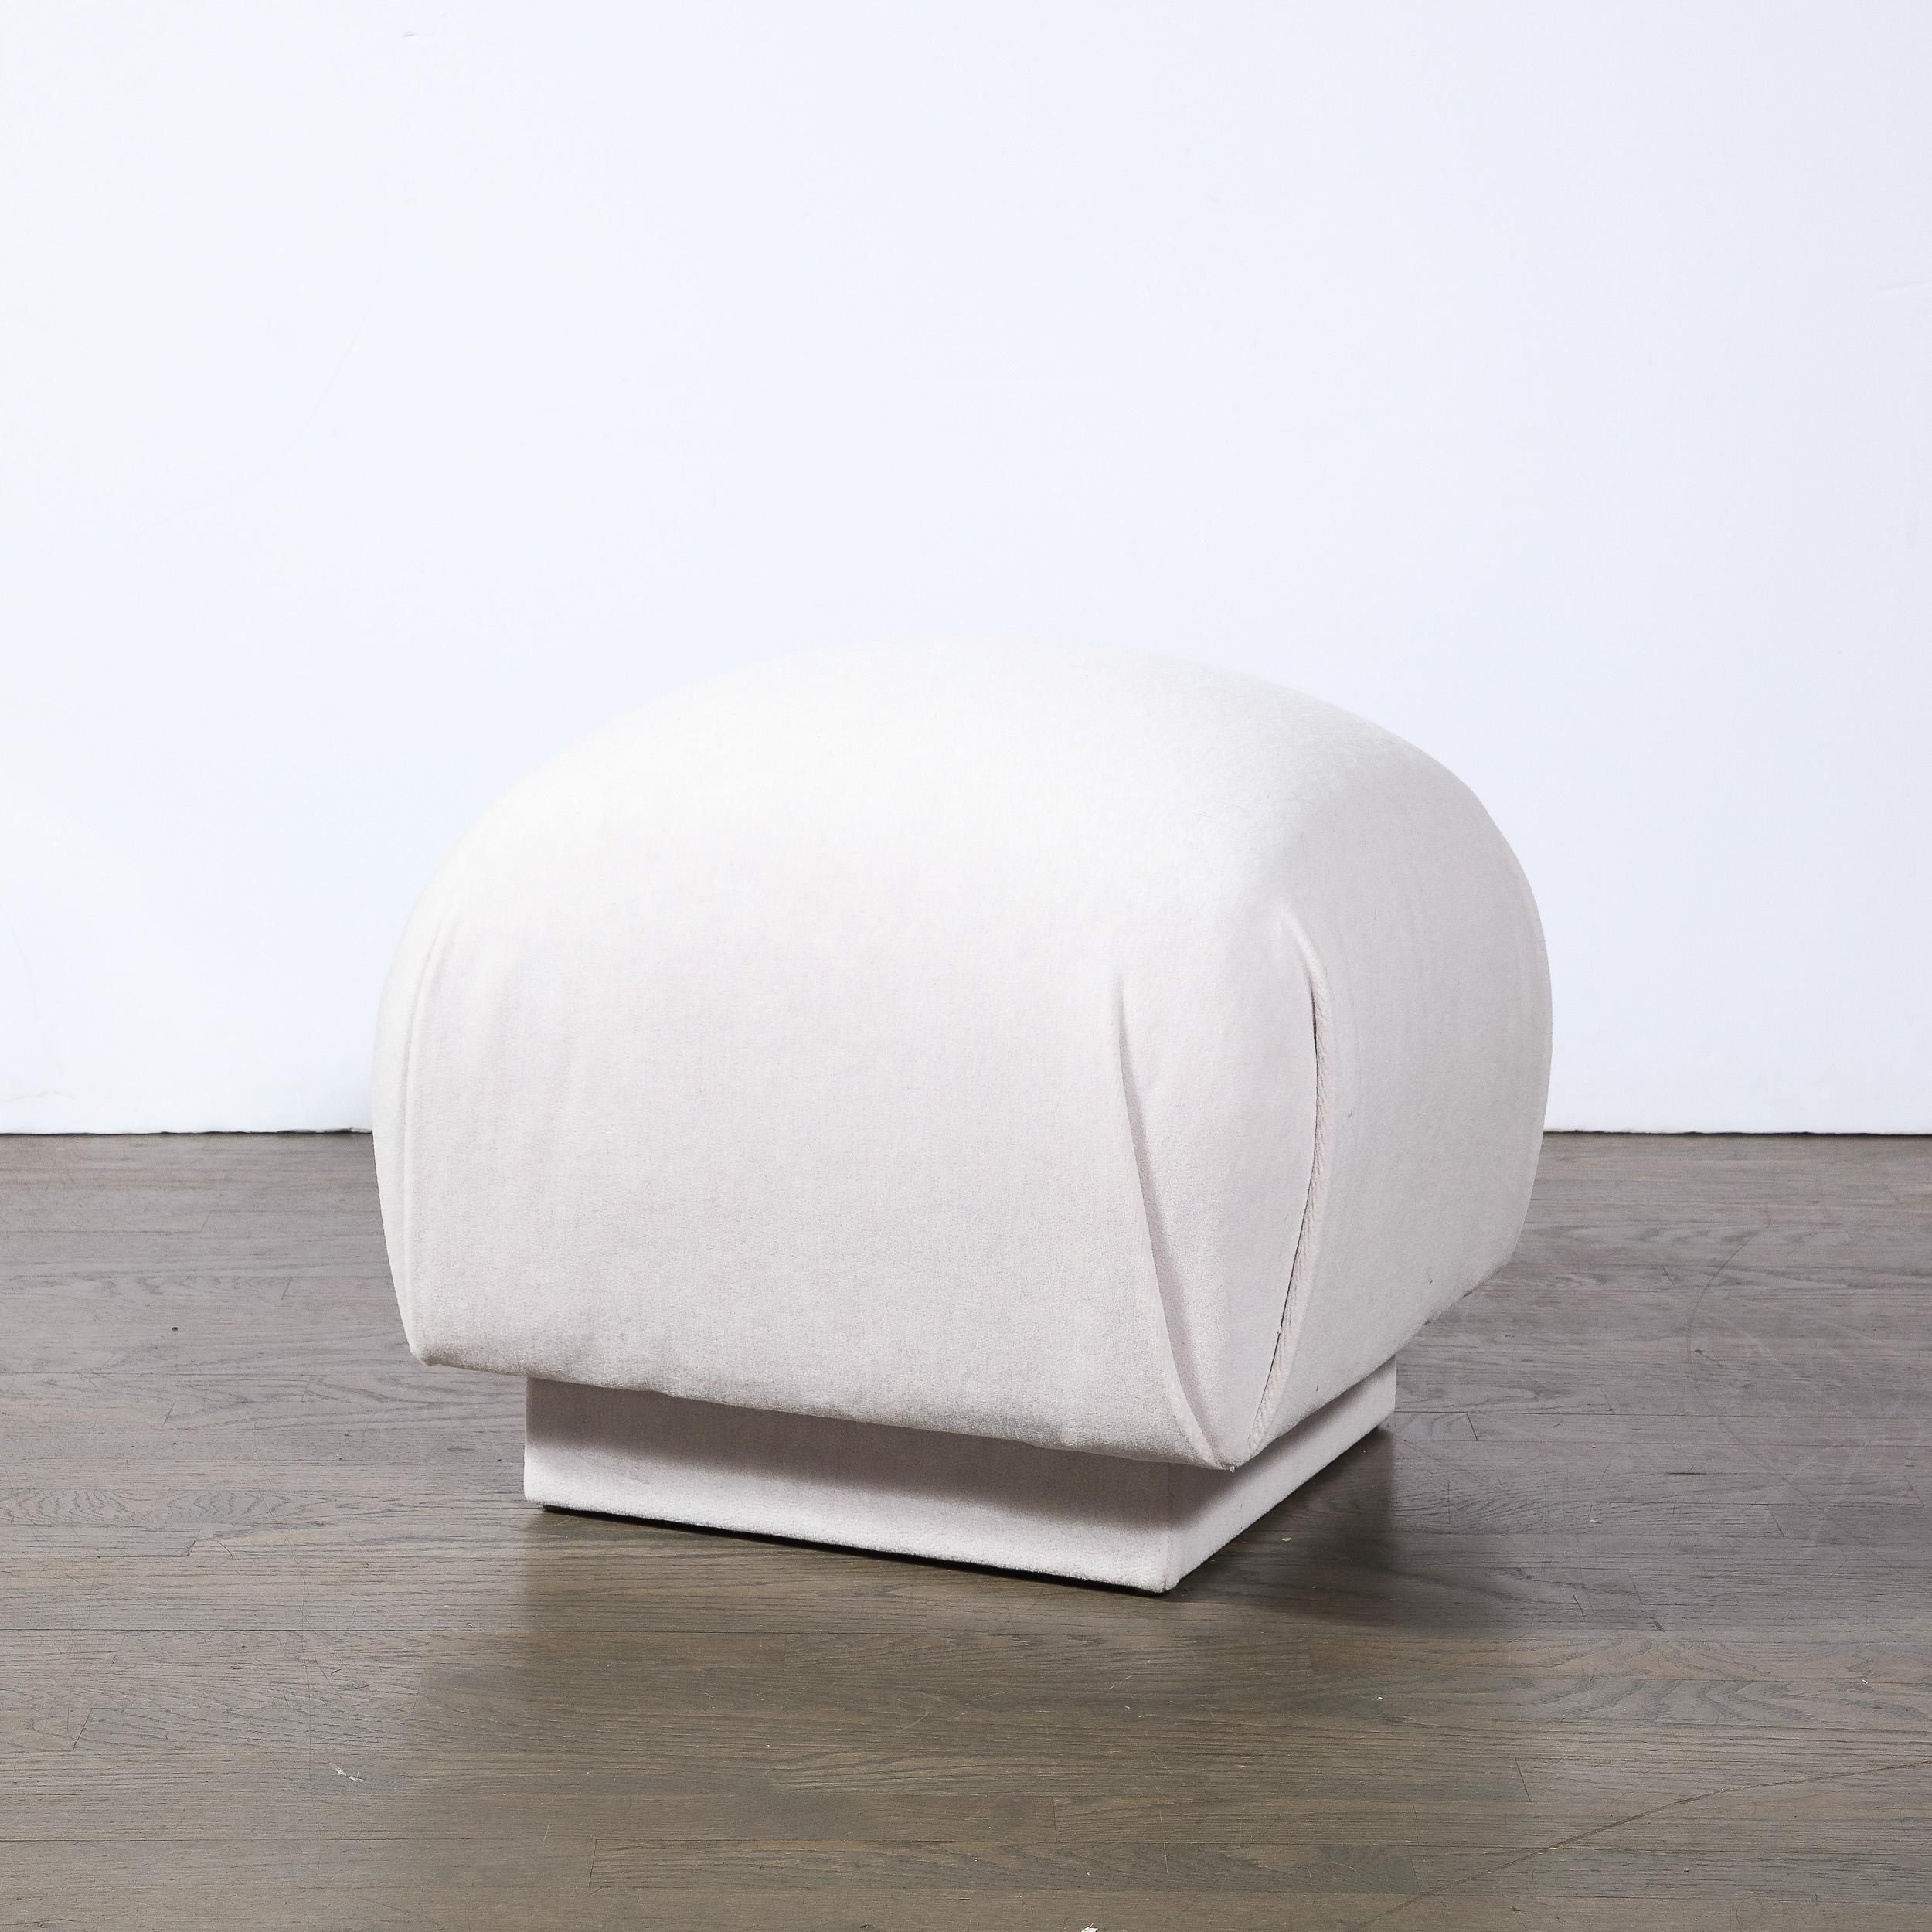 This sophisticated Mid-Century Modern Ottoman was realized by the esteemed Leon Rosen for Pace in the United States circa 1970. It features an elegantly domed and convex seat with perfectly gathered fabric at each corner sitting on a volumetric